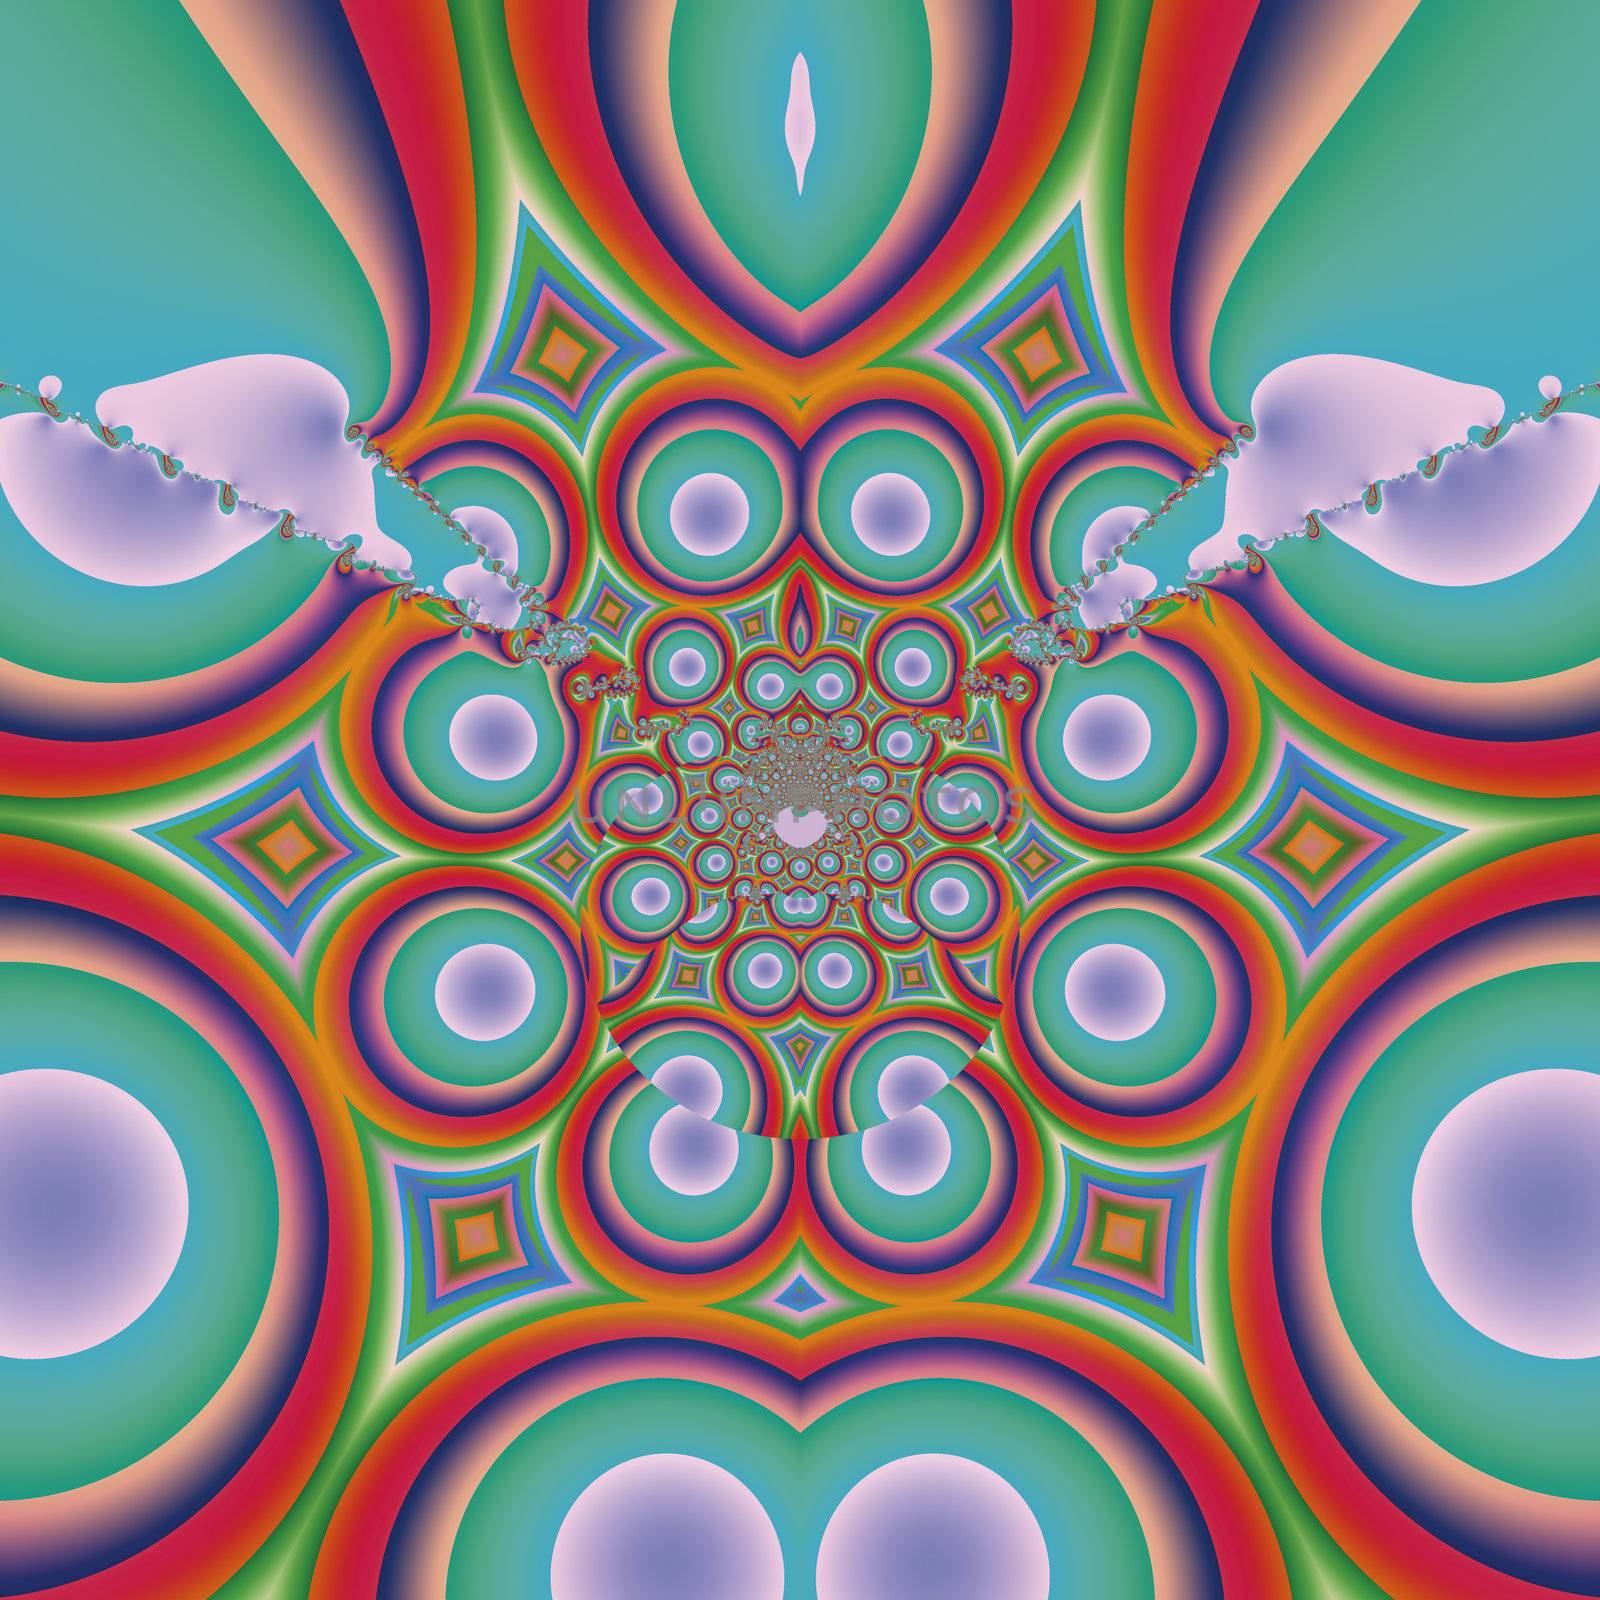 Bright and funky fractal design, abstract art, meditation